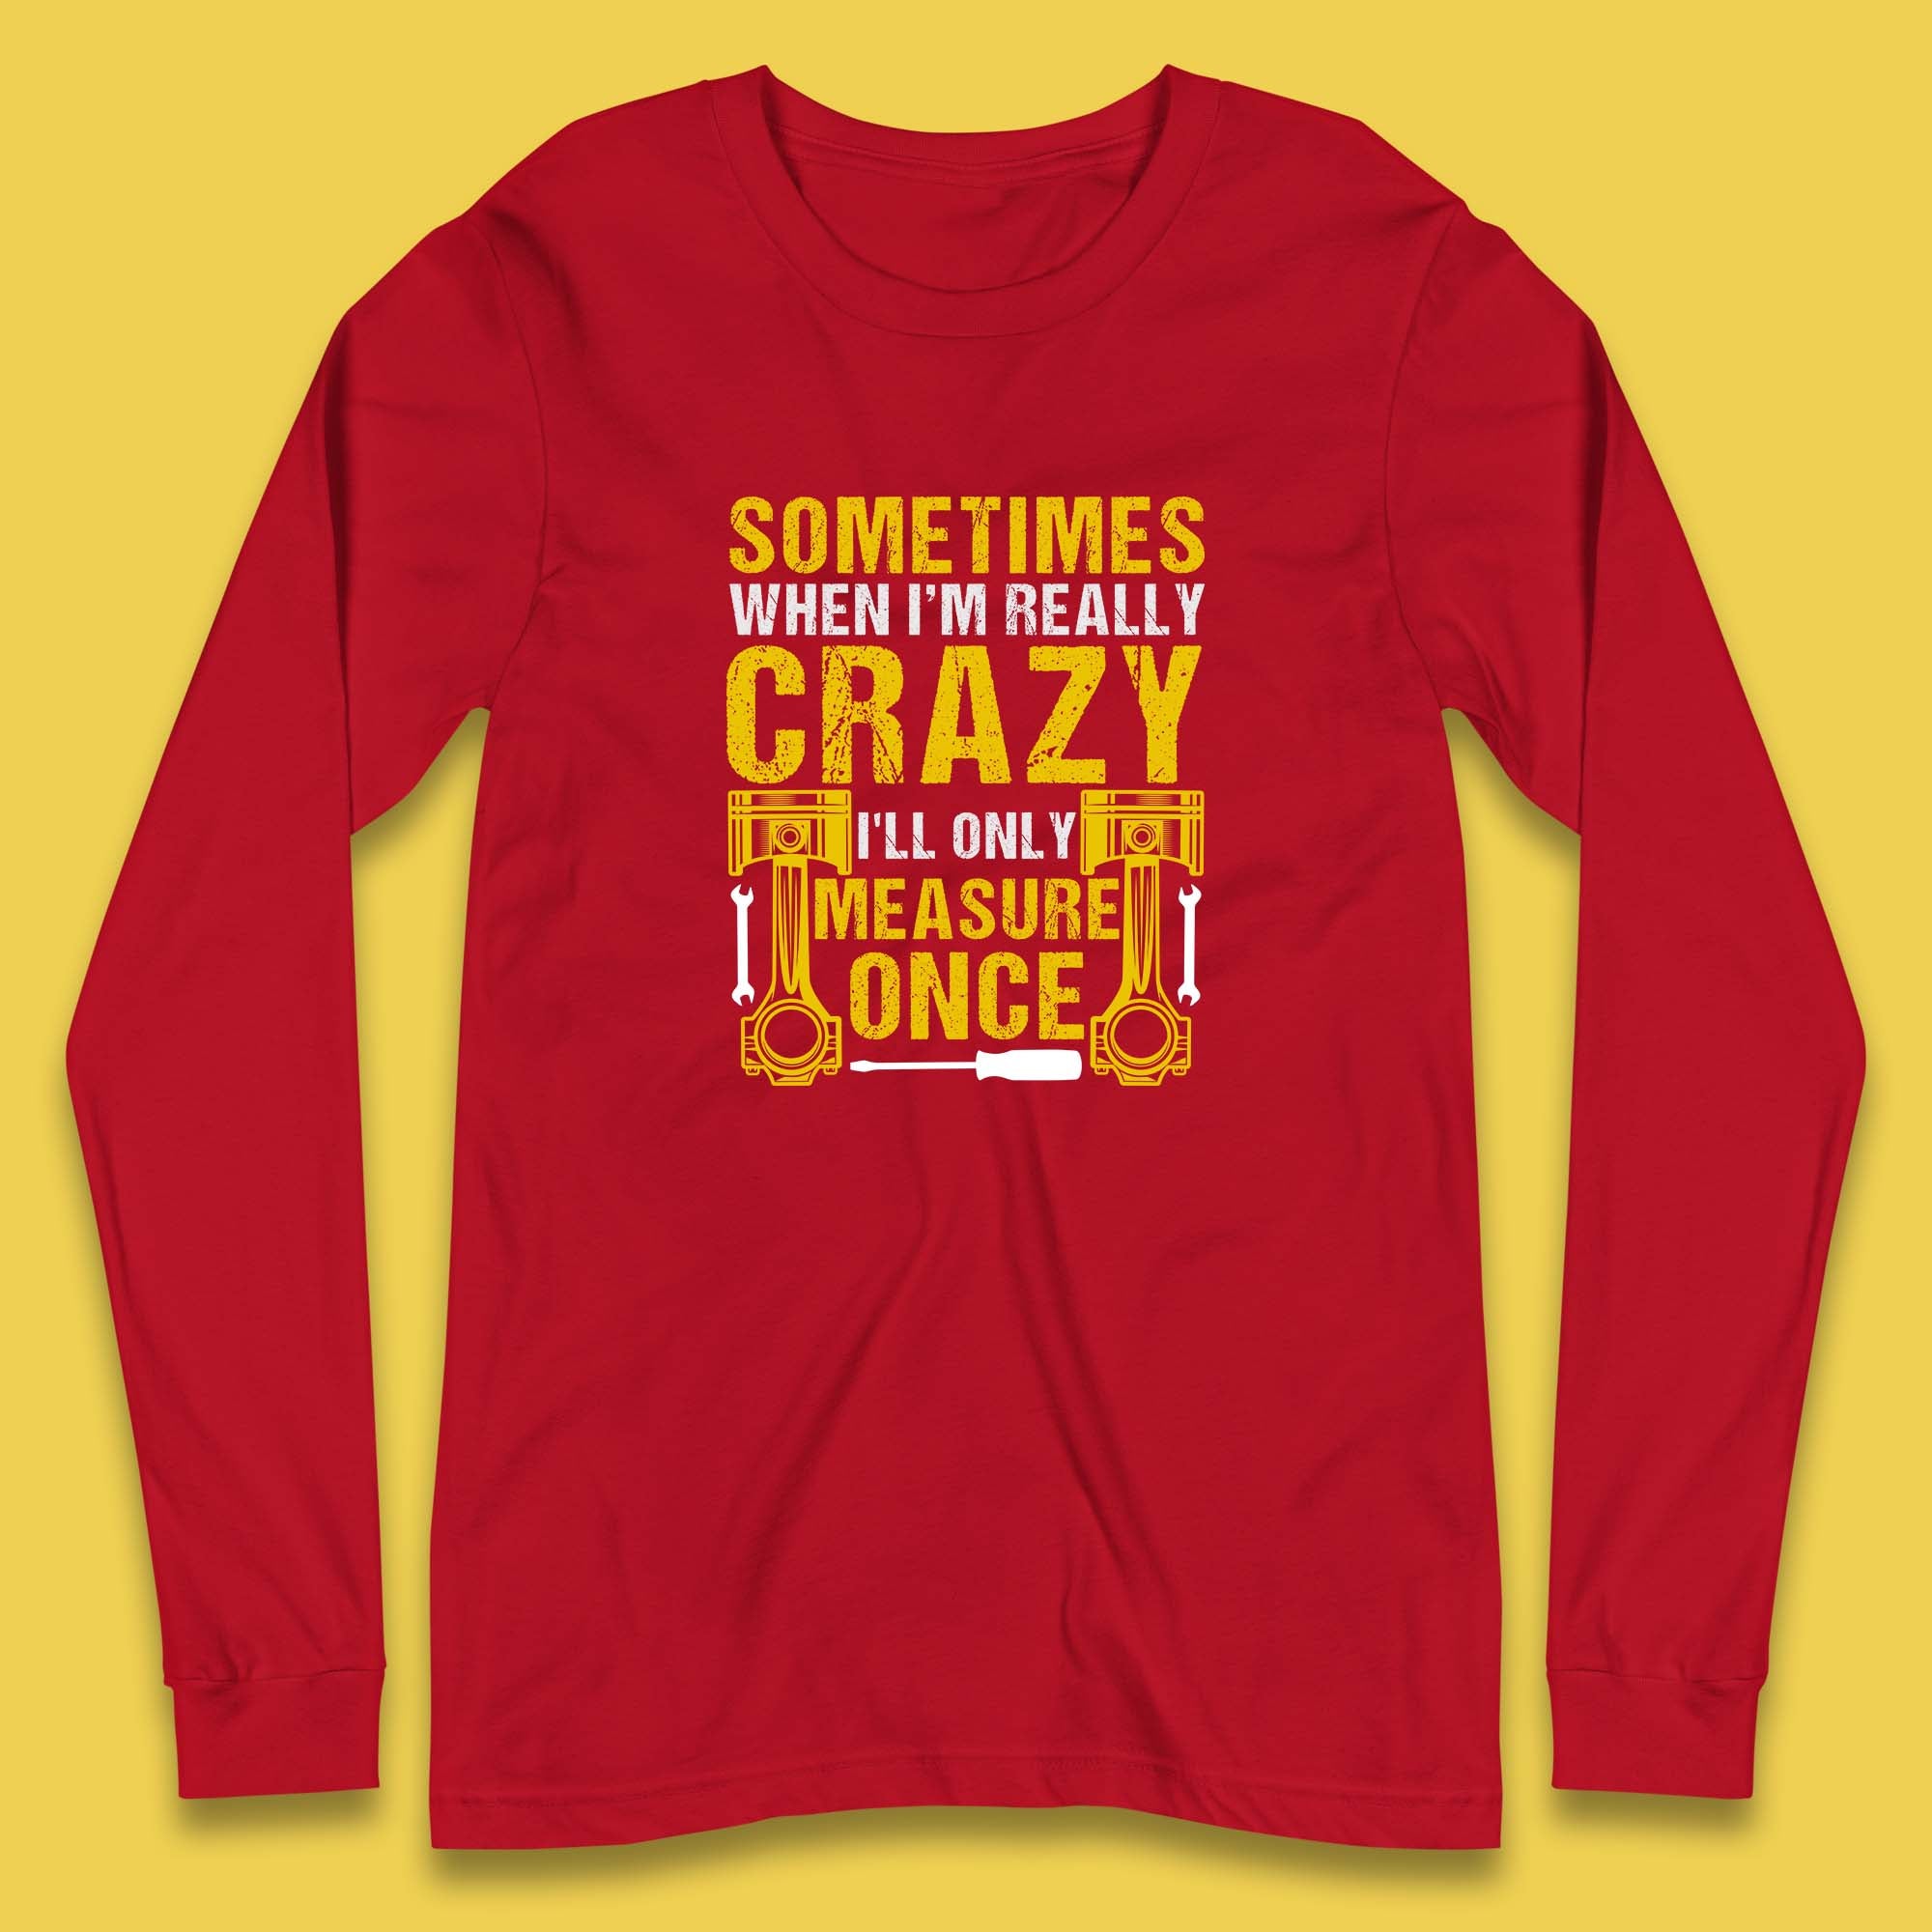 Sometimes When I'm Really Crazy I'll Only Measure Once Funny Handyman Gift Long Sleeve T Shirt